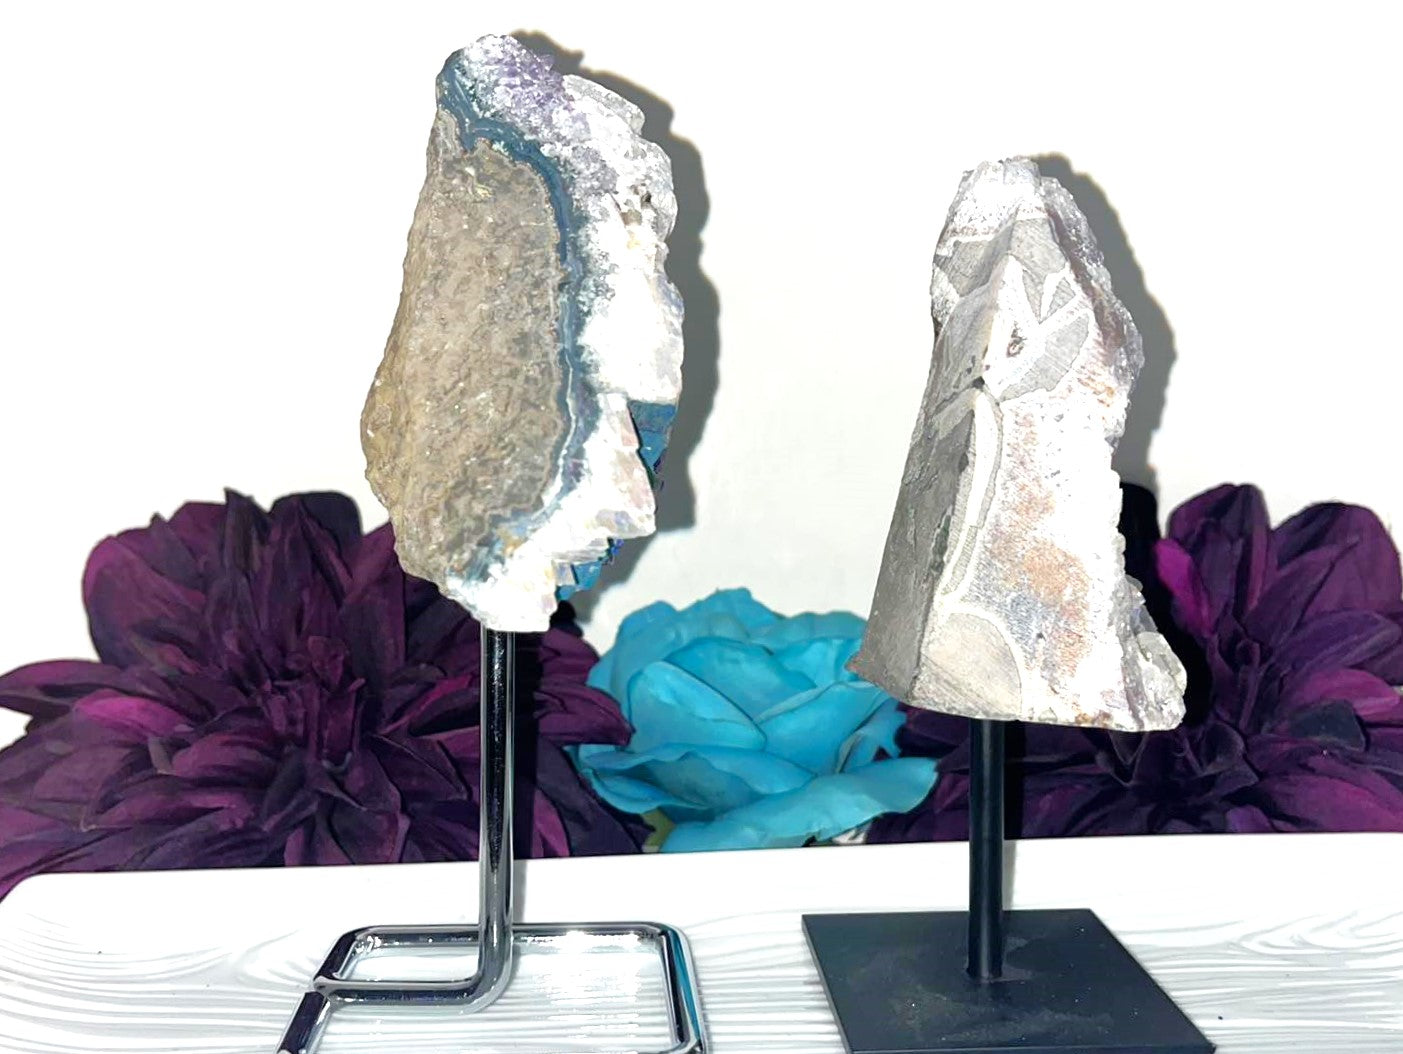 Stunning Rainbow Aura Amethyst druzy specimens on secured stands. Absolute collector's items!